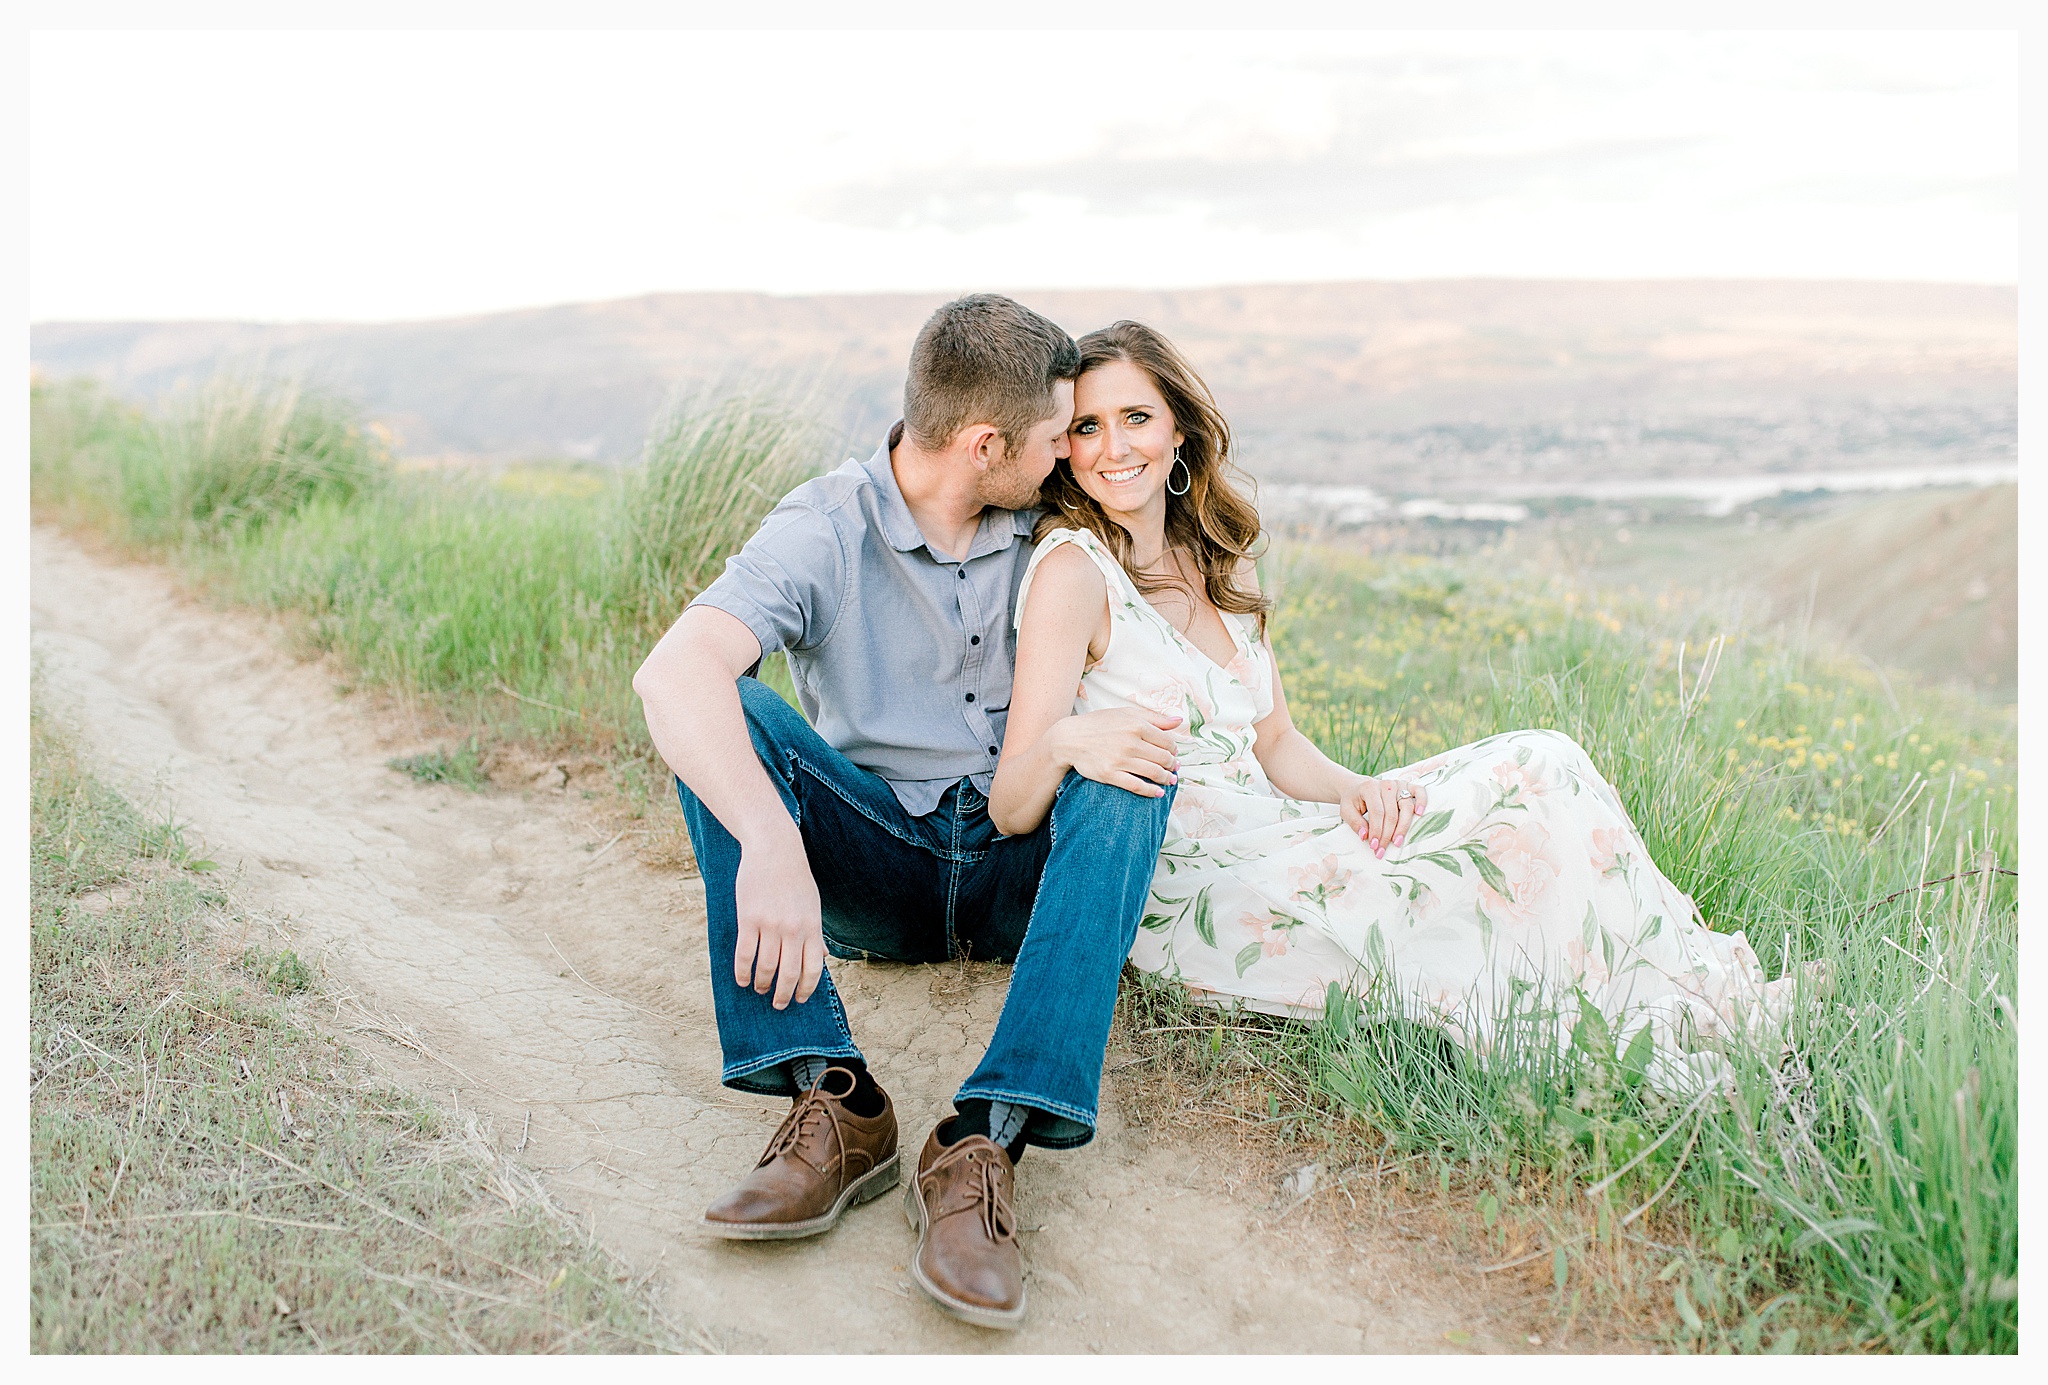 Engagement session amongst the wildflowers in Wenatchee, Washington | Engagement Session Outfit Inspiration for Wedding Photography with Emma Rose Company | Light and Airy PNW Photographer, Seattle Bride_0026.jpg